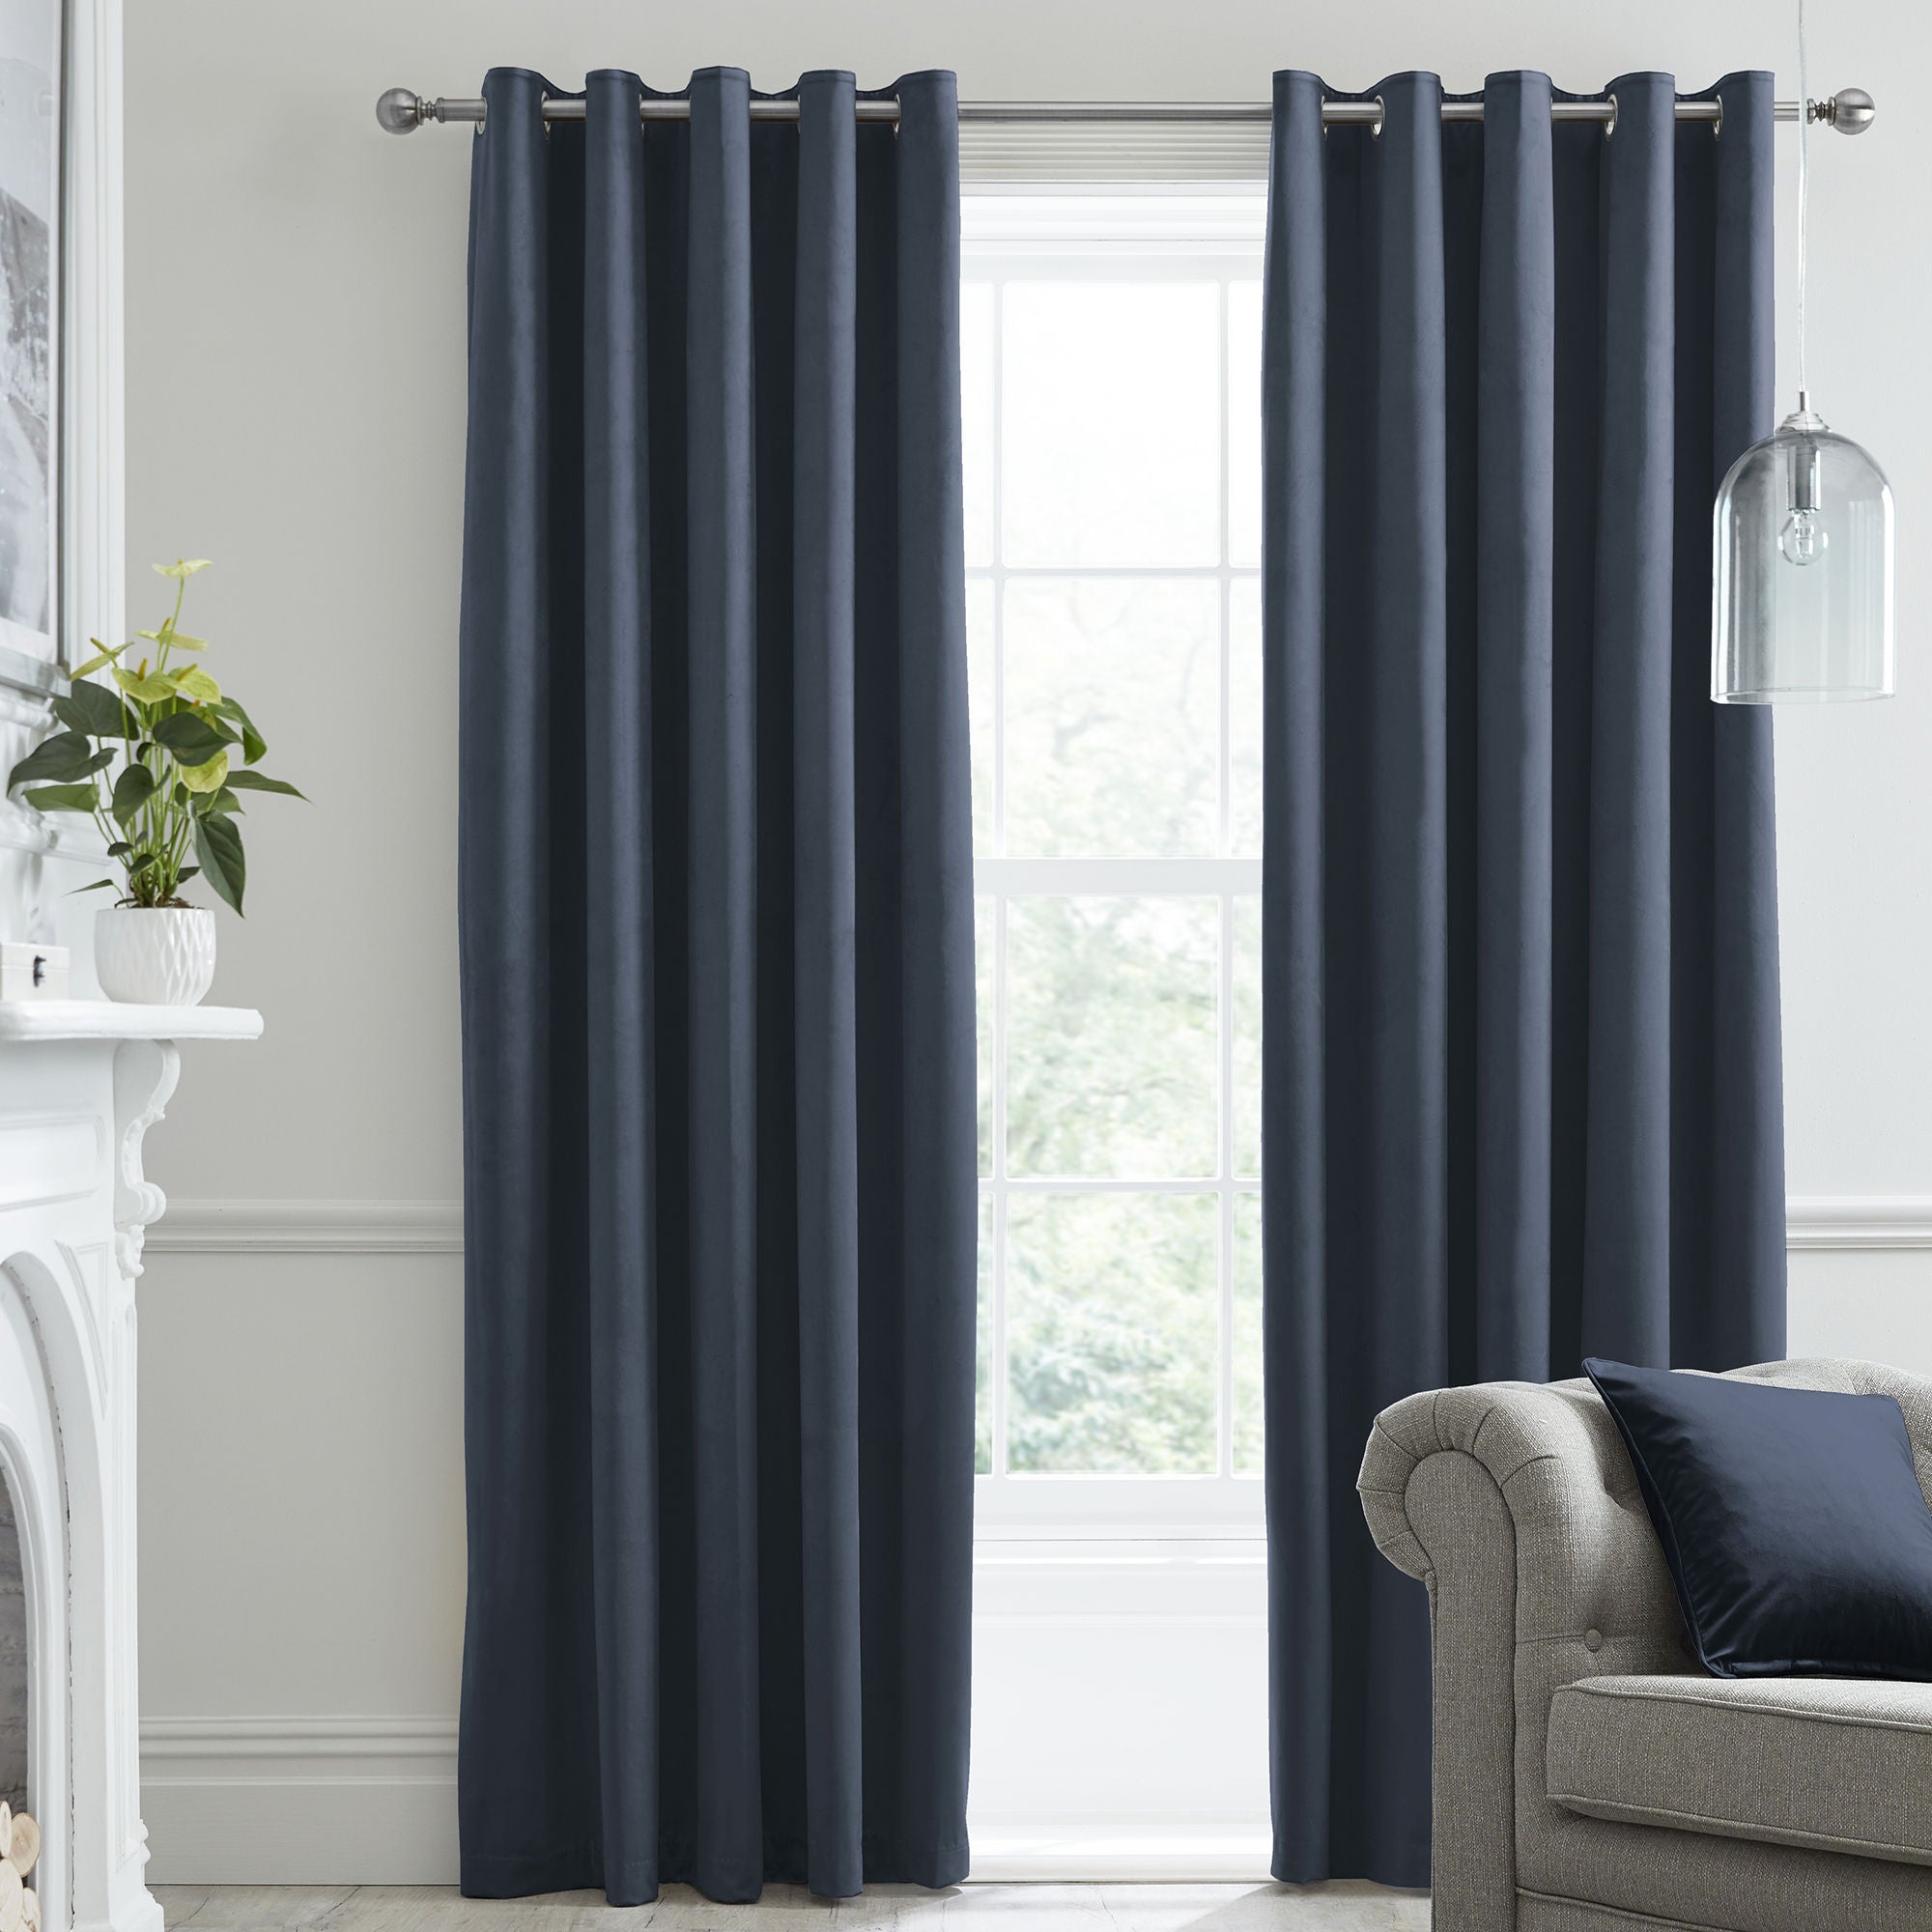 Montrose Pair of Eyelet Curtains by Laurence Llewelyn-Bowen in Navy - Pair of Eyelet Curtains - Laurence Llewelyn-Bowen